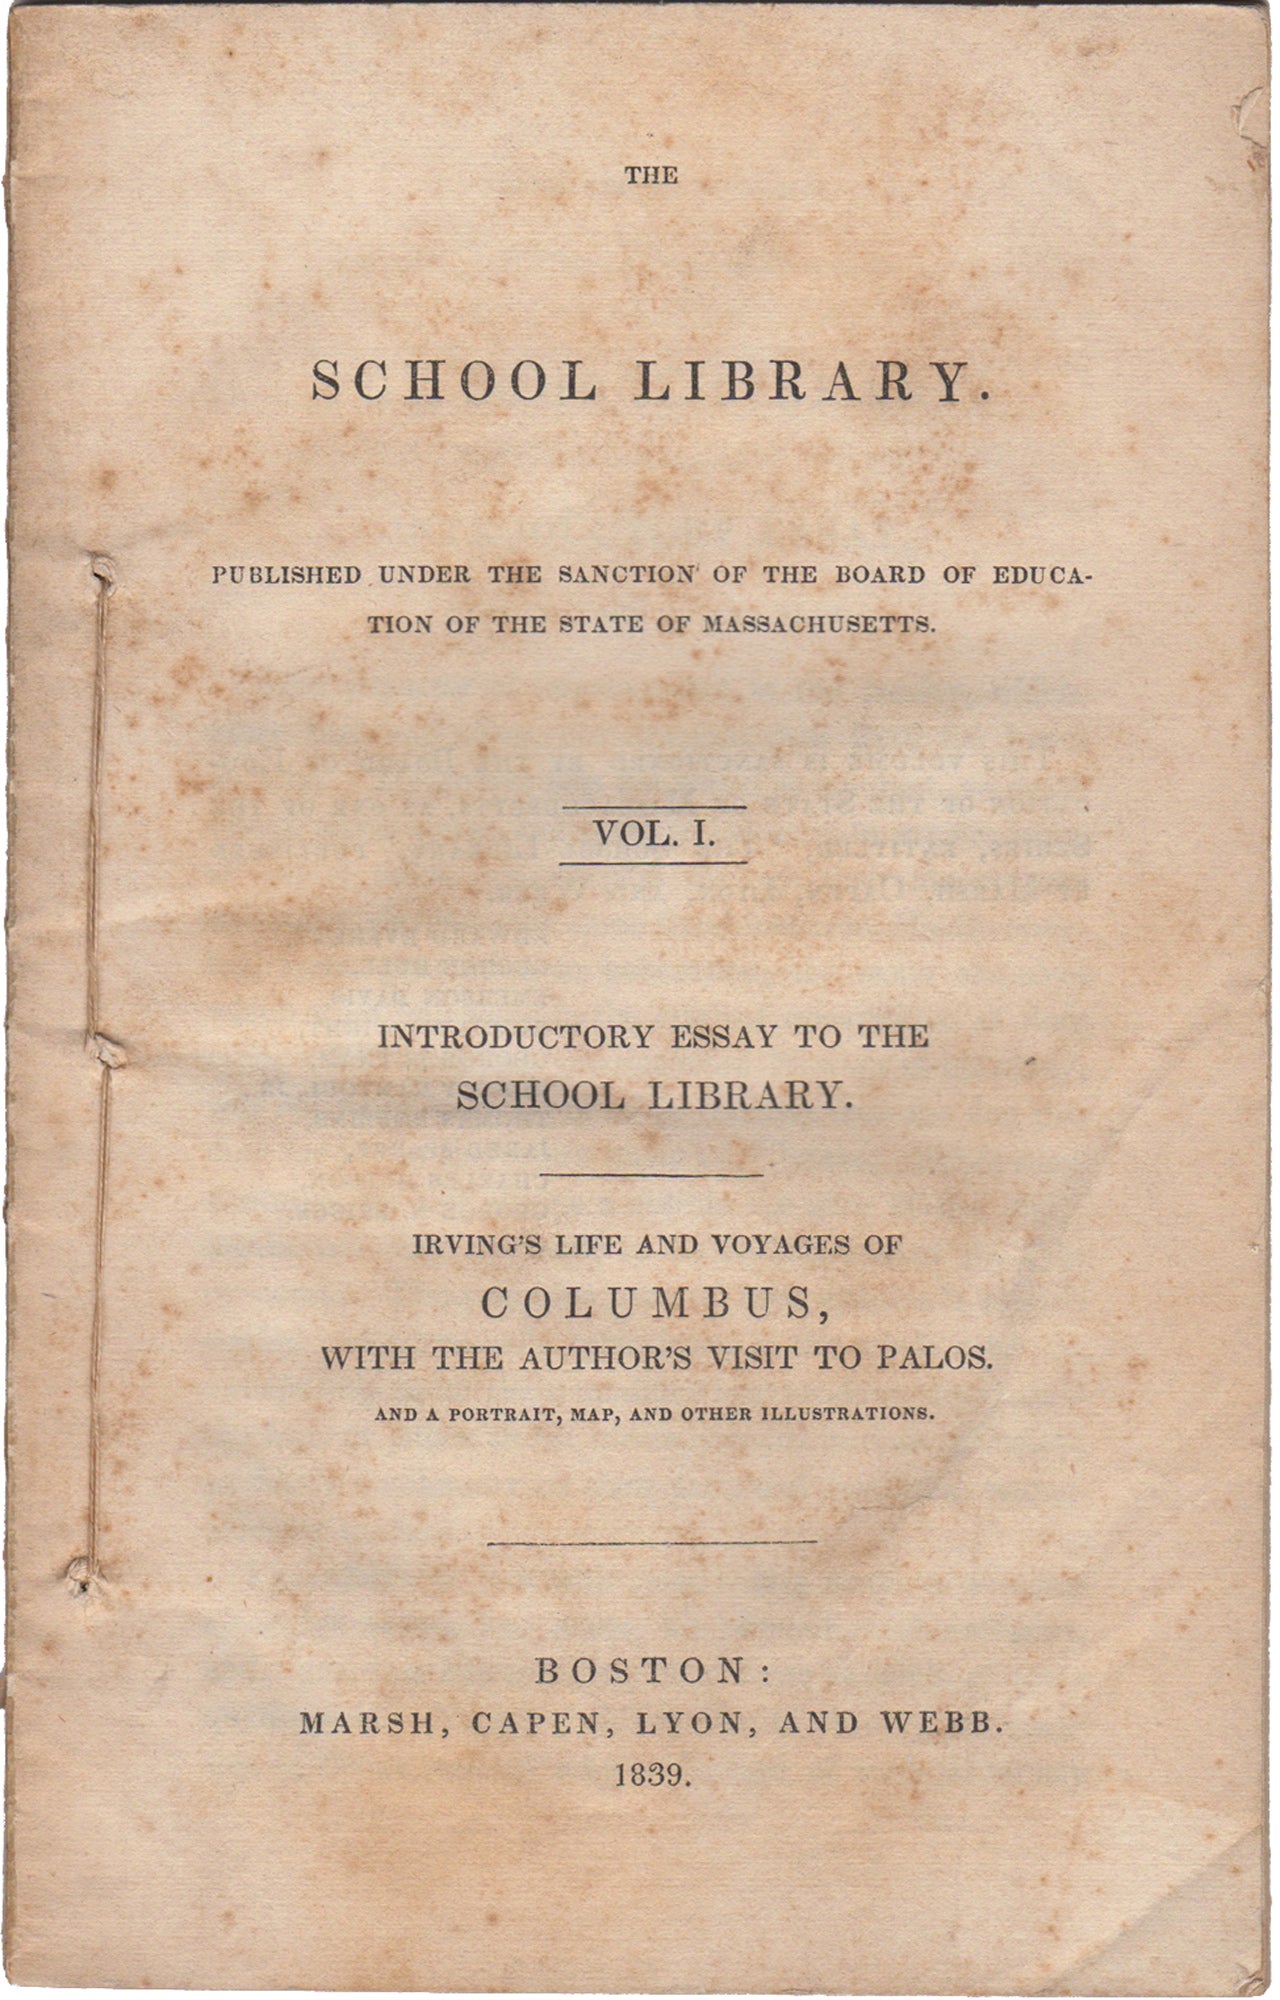 [Massachusetts. Board of Education]. Marsh, Capen, Lyon, and Webb - The School Library. Published Under the Sanction of the Board of Education of the State of Massachusetts. ' Vol. I. Introductory Essay to the School Library. Irving's Life and Voyages of Columbus, with the Author's Visit to Palos, and a Portrait, Map, and Other Illustrations